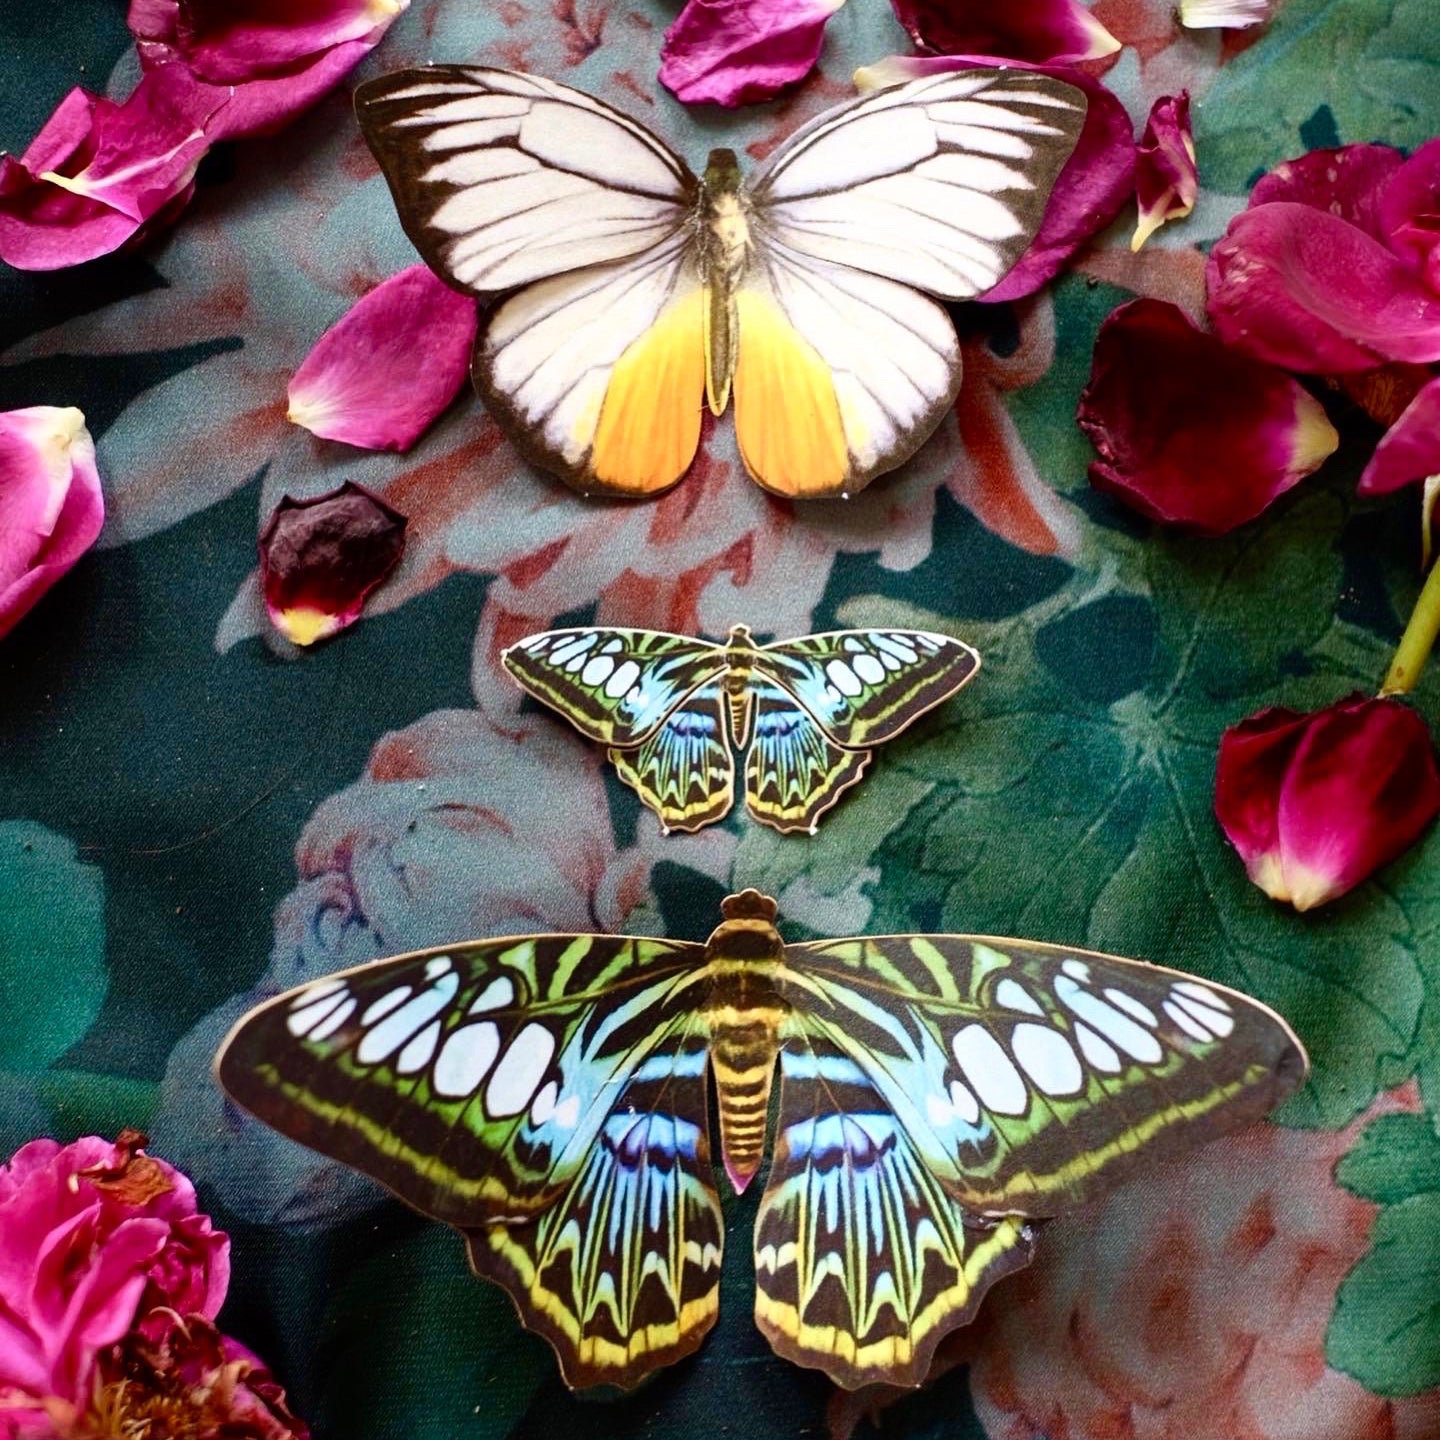 The Butterfly Collection 2 "Jewels of the East"